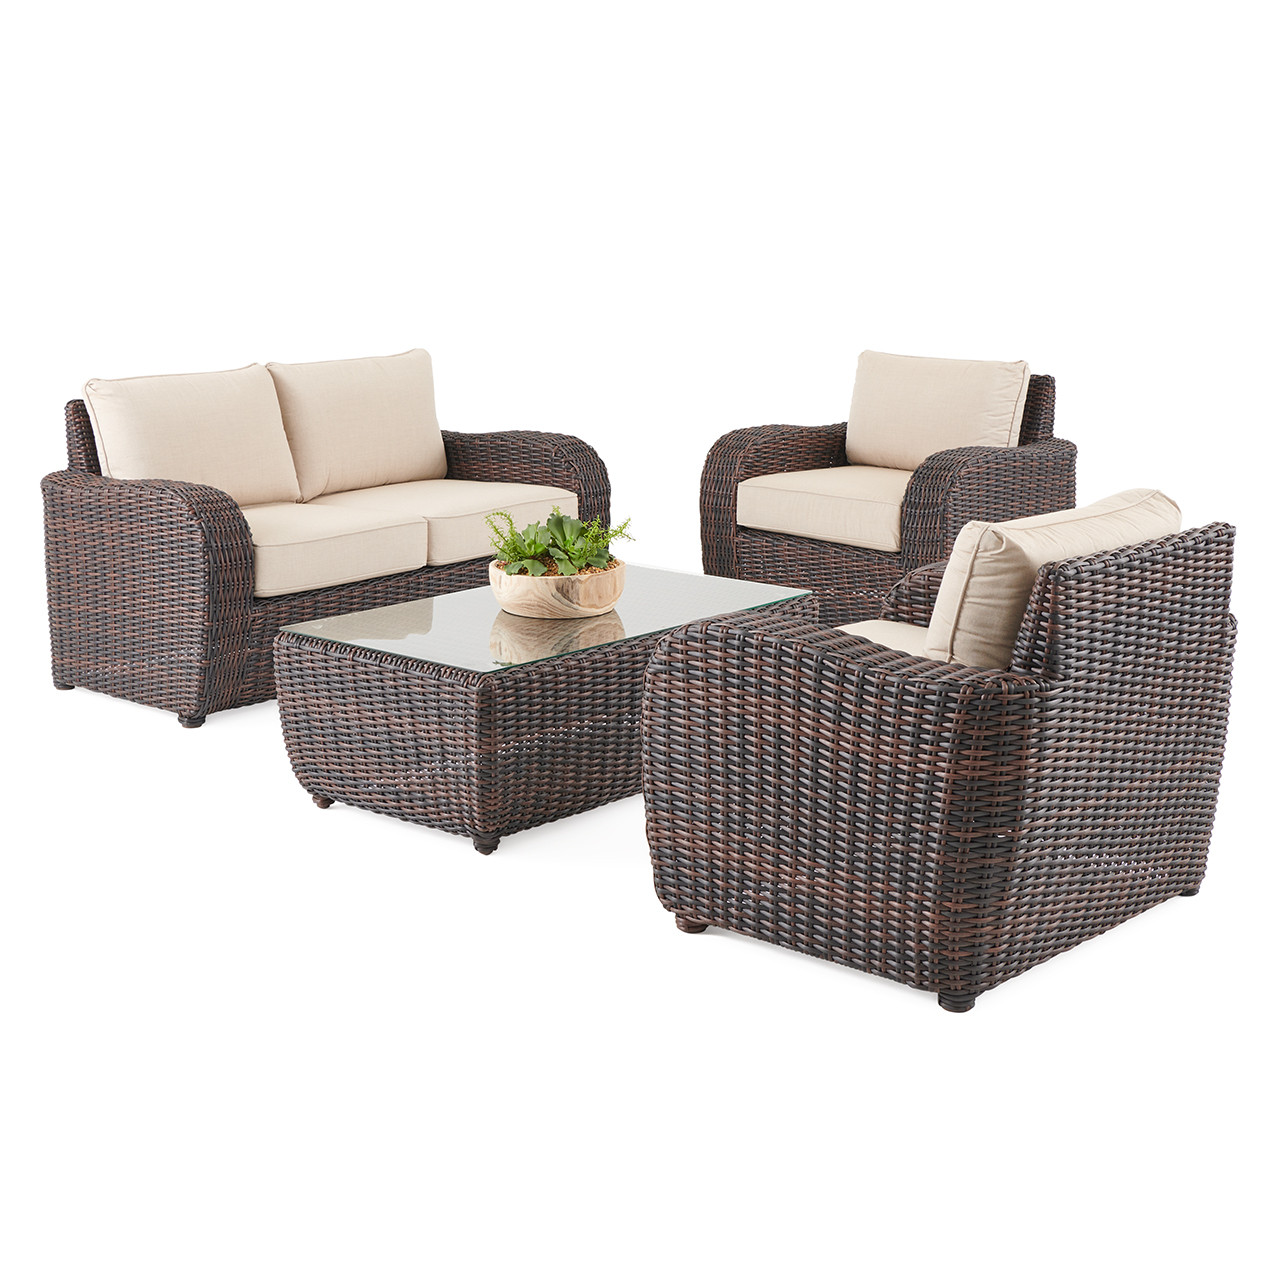 Biscayne Sangria Outdoor Wicker and Cushion 4 Pc. Loveseat Group with 48 x 28 in. Coffee Table